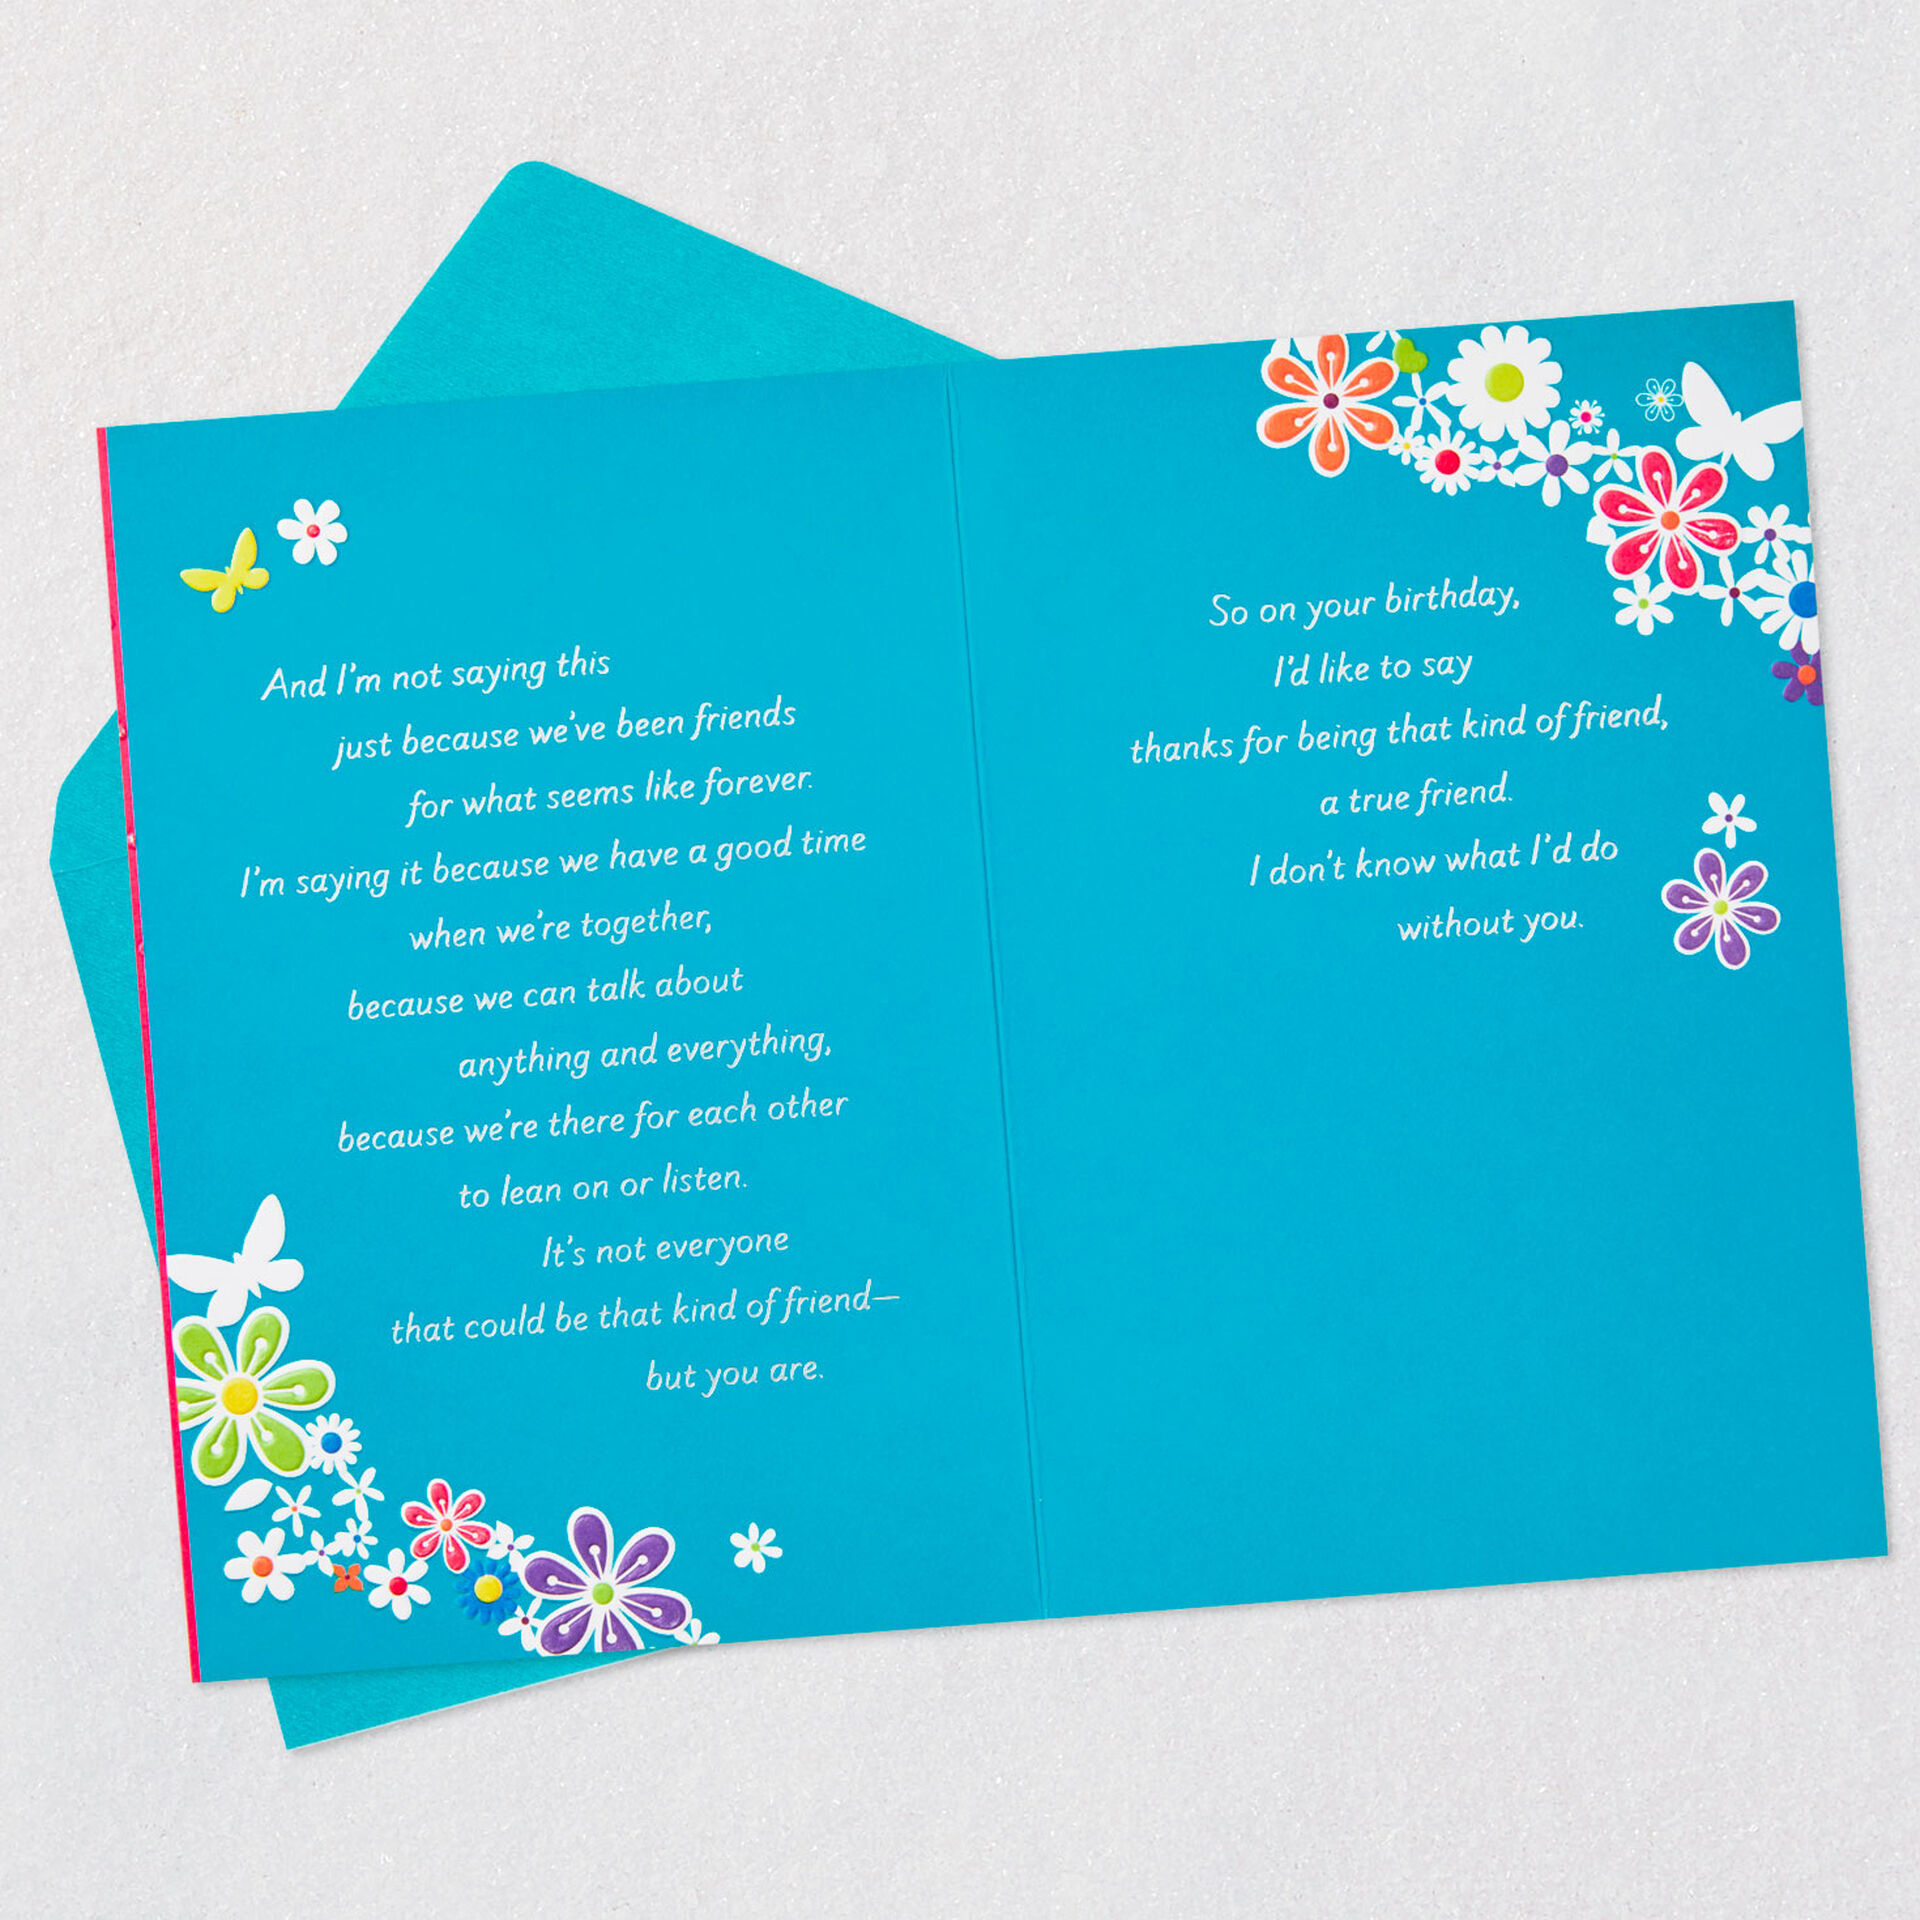 Flowers-and-Butterflies-Birthday-Card-for-Friend_499HBD9664_04